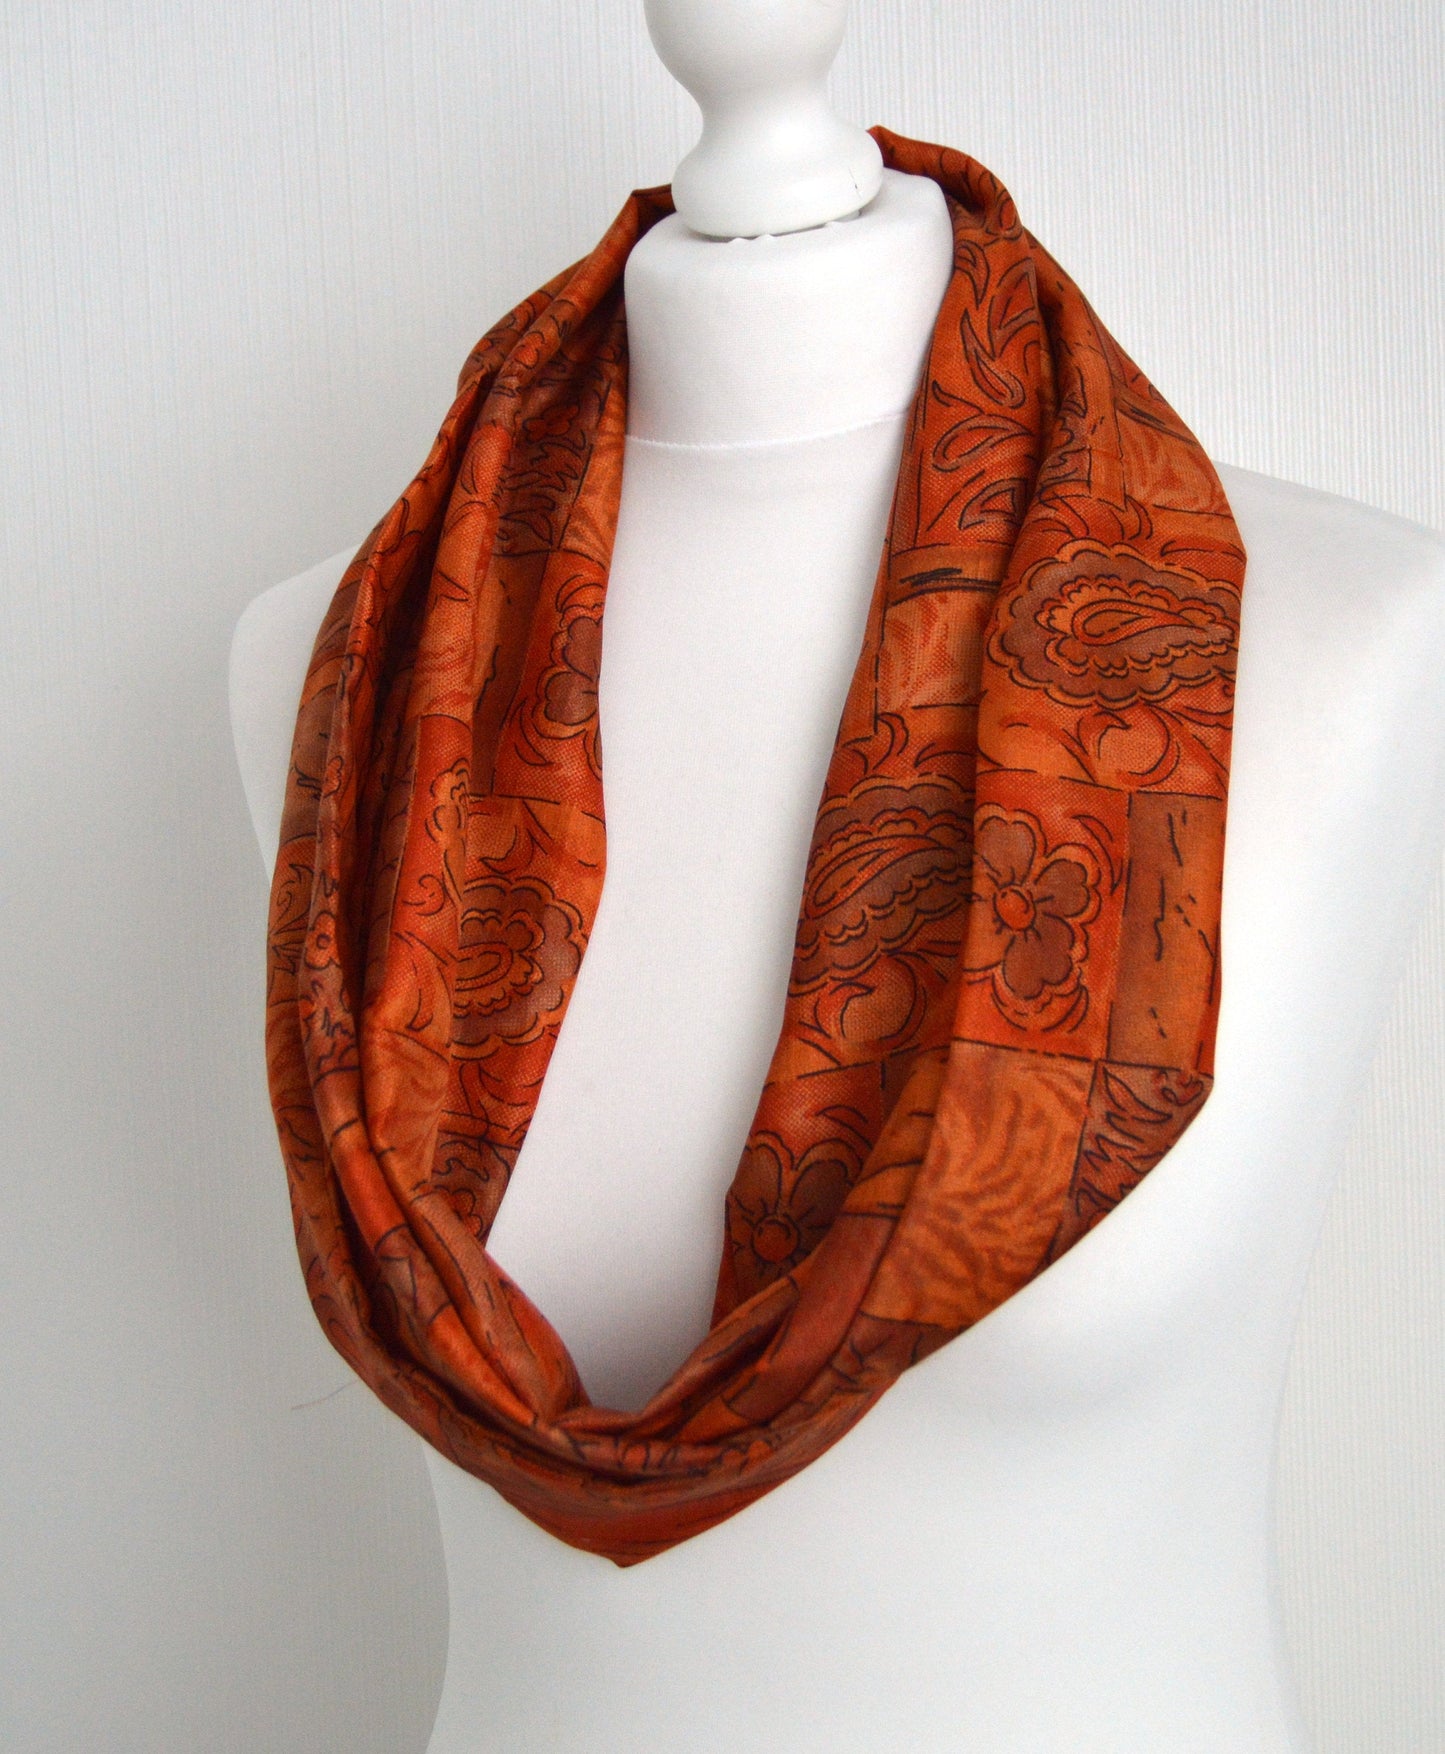 Burnt Orange Sari Silk Scarf - Handmade Boho Eco Friendly Upcycled Womens Scarf - Sophisticated Spring Summer Trend Mothers Day Gift for Her